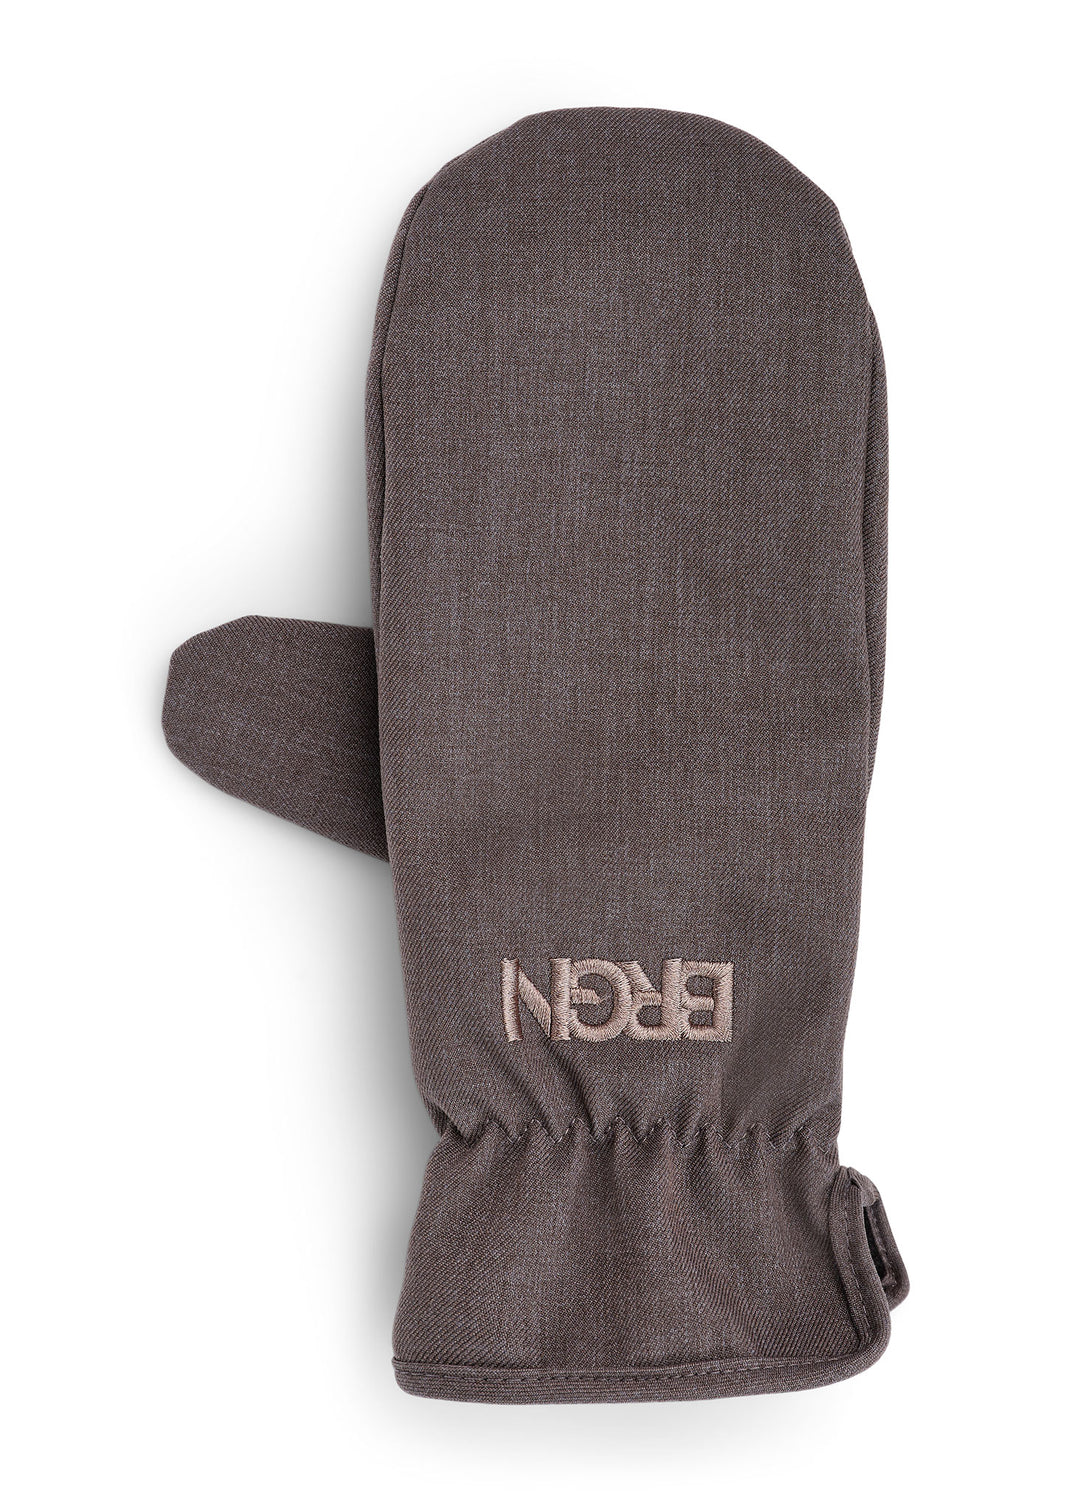 BRGN by Lunde & Gaundal Mittens Accessories 085 Concrete Grey